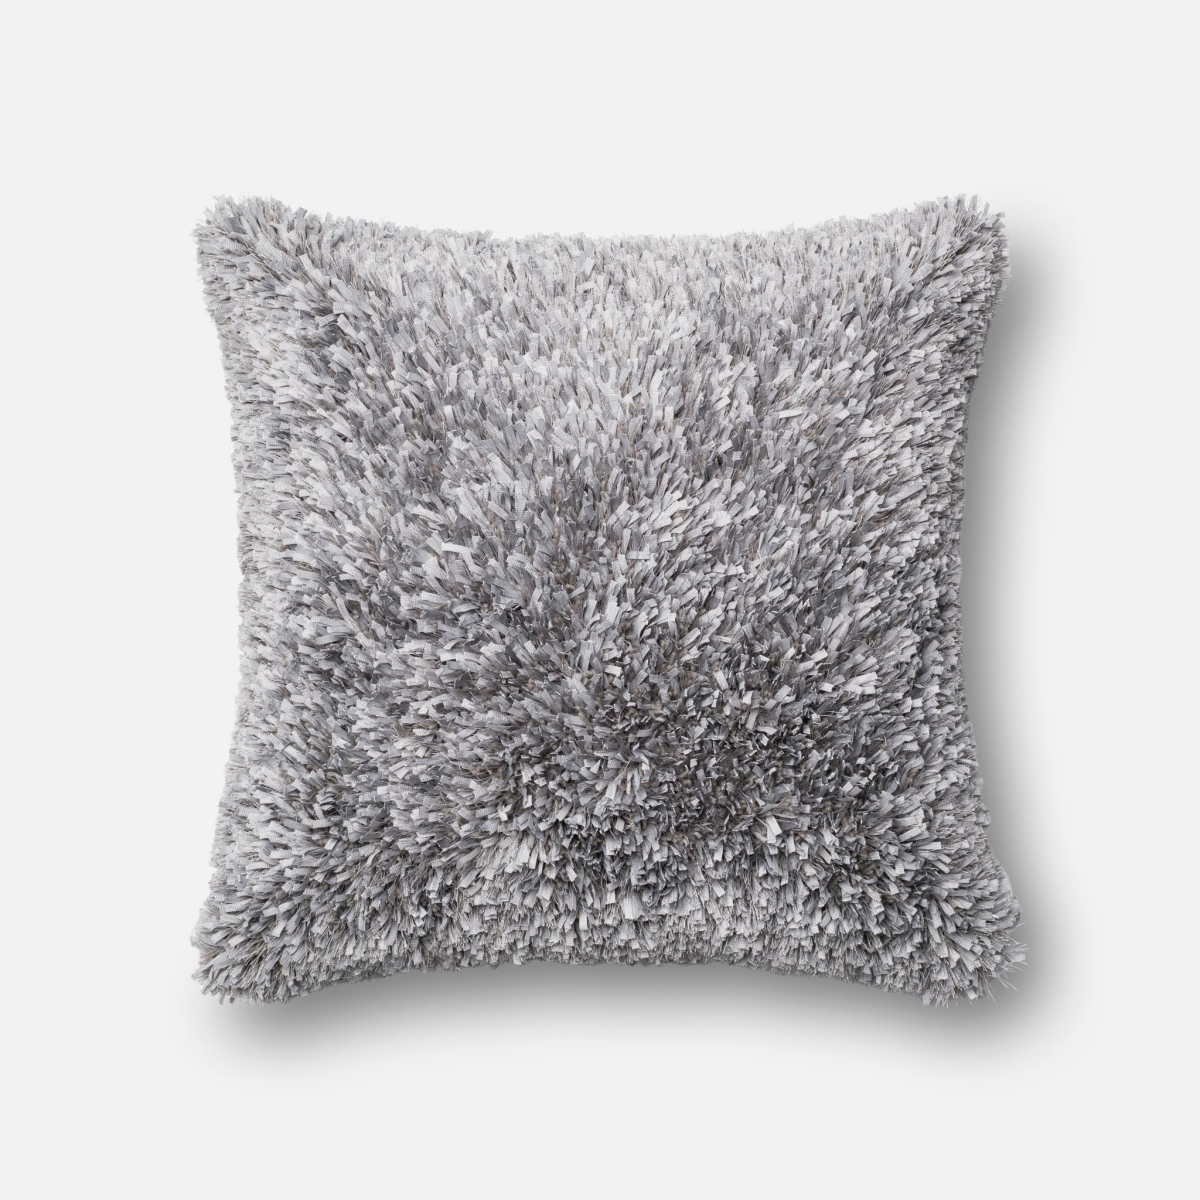 Dsetp0045gy00pil3 22 X 22 In. Contemporary Down Insert Decorative Pillow - Grey